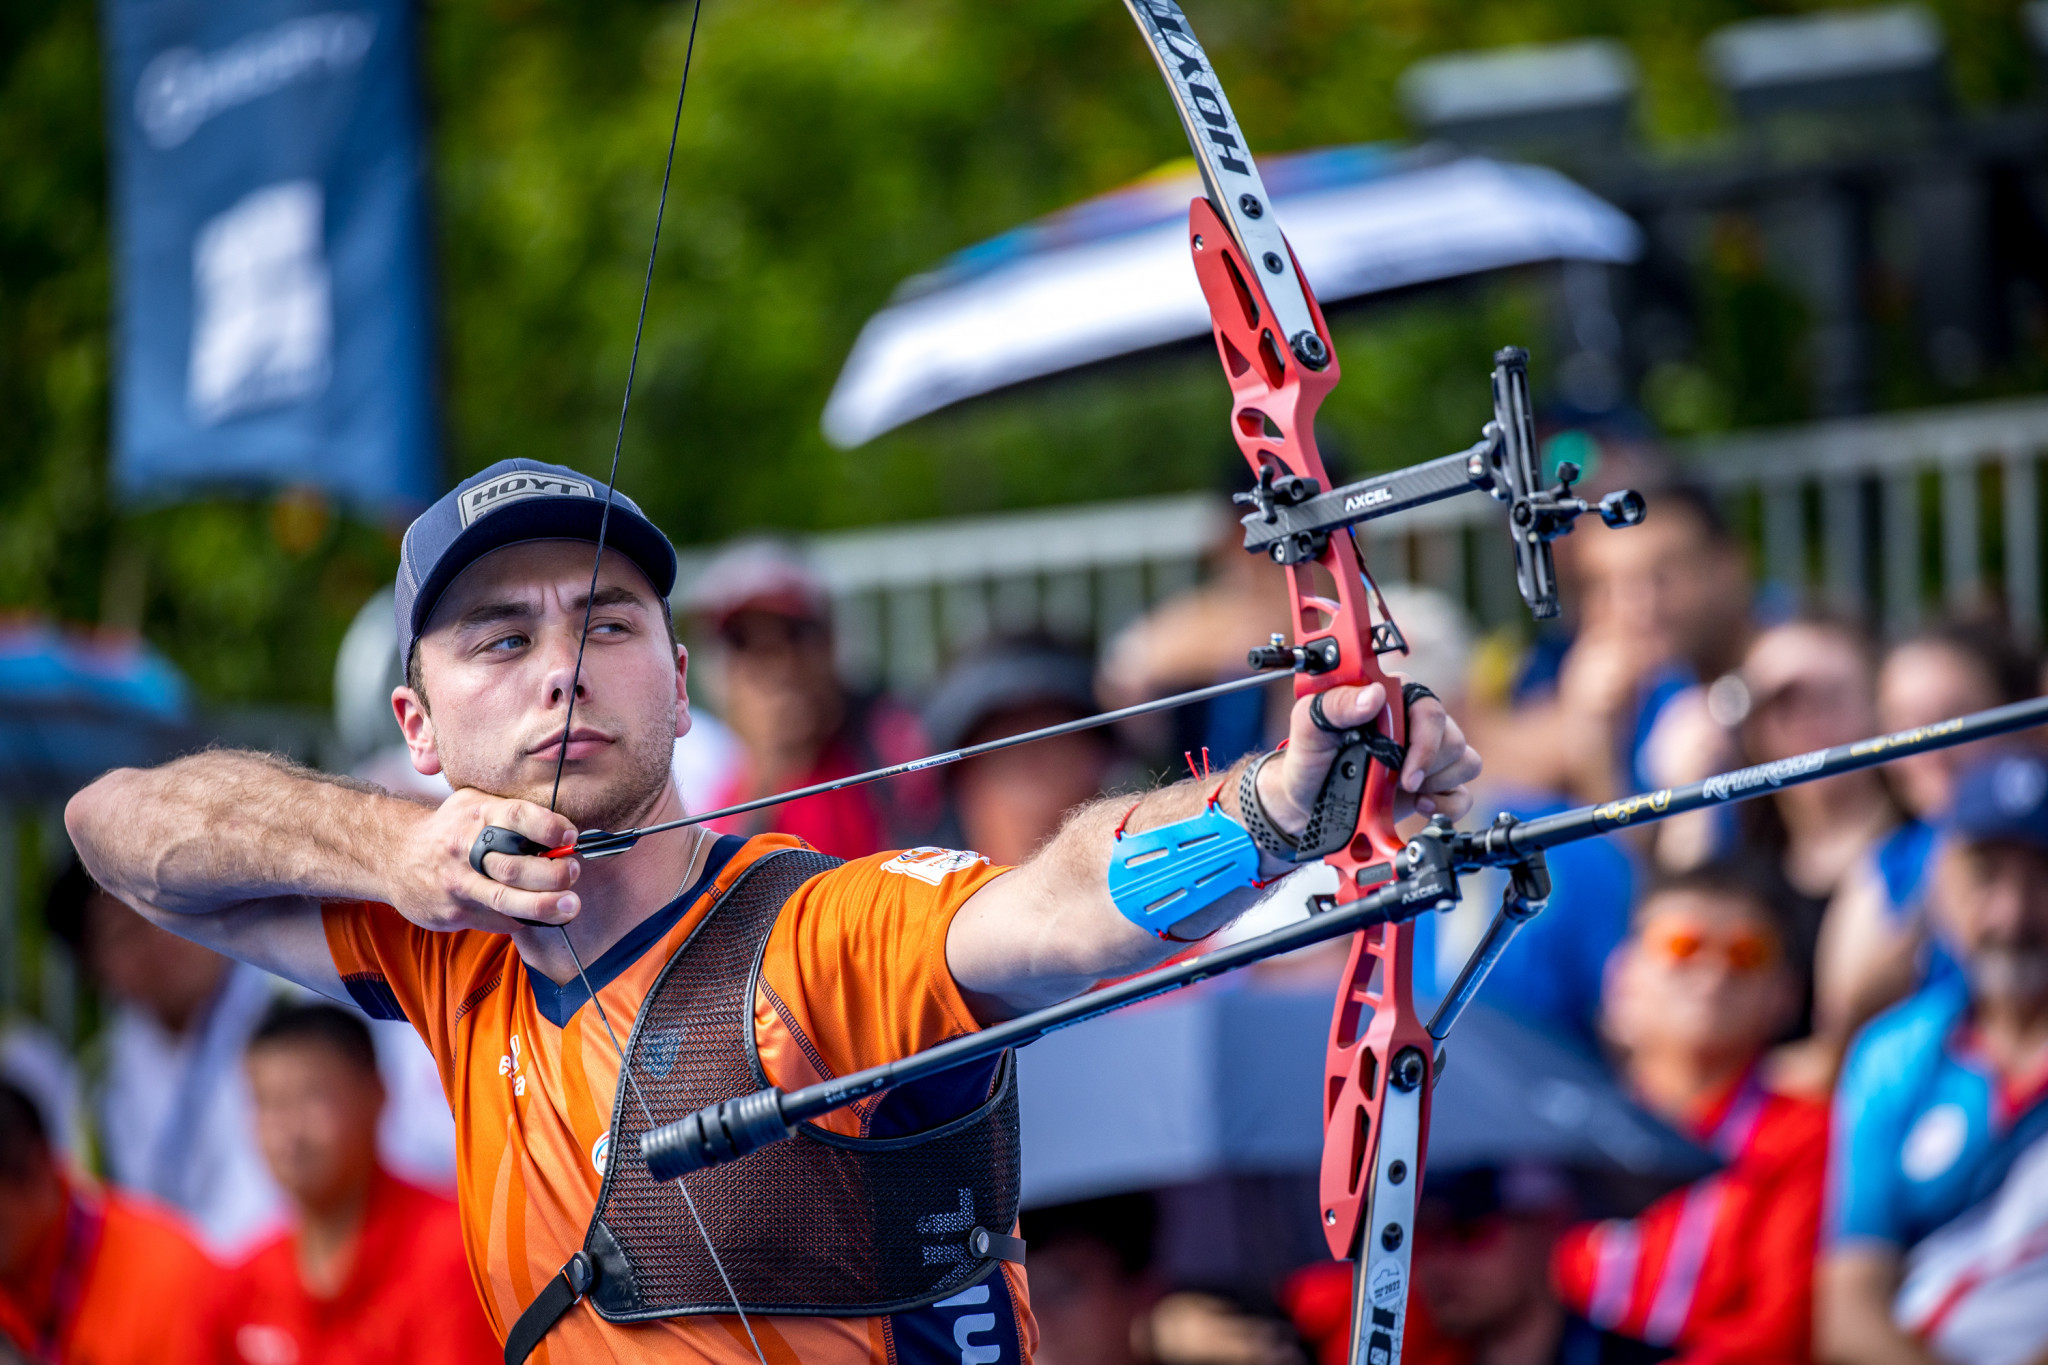 Dutch Archer Wijler will be another to compete at the upcoming Games for his nation. GETTY IMAGES